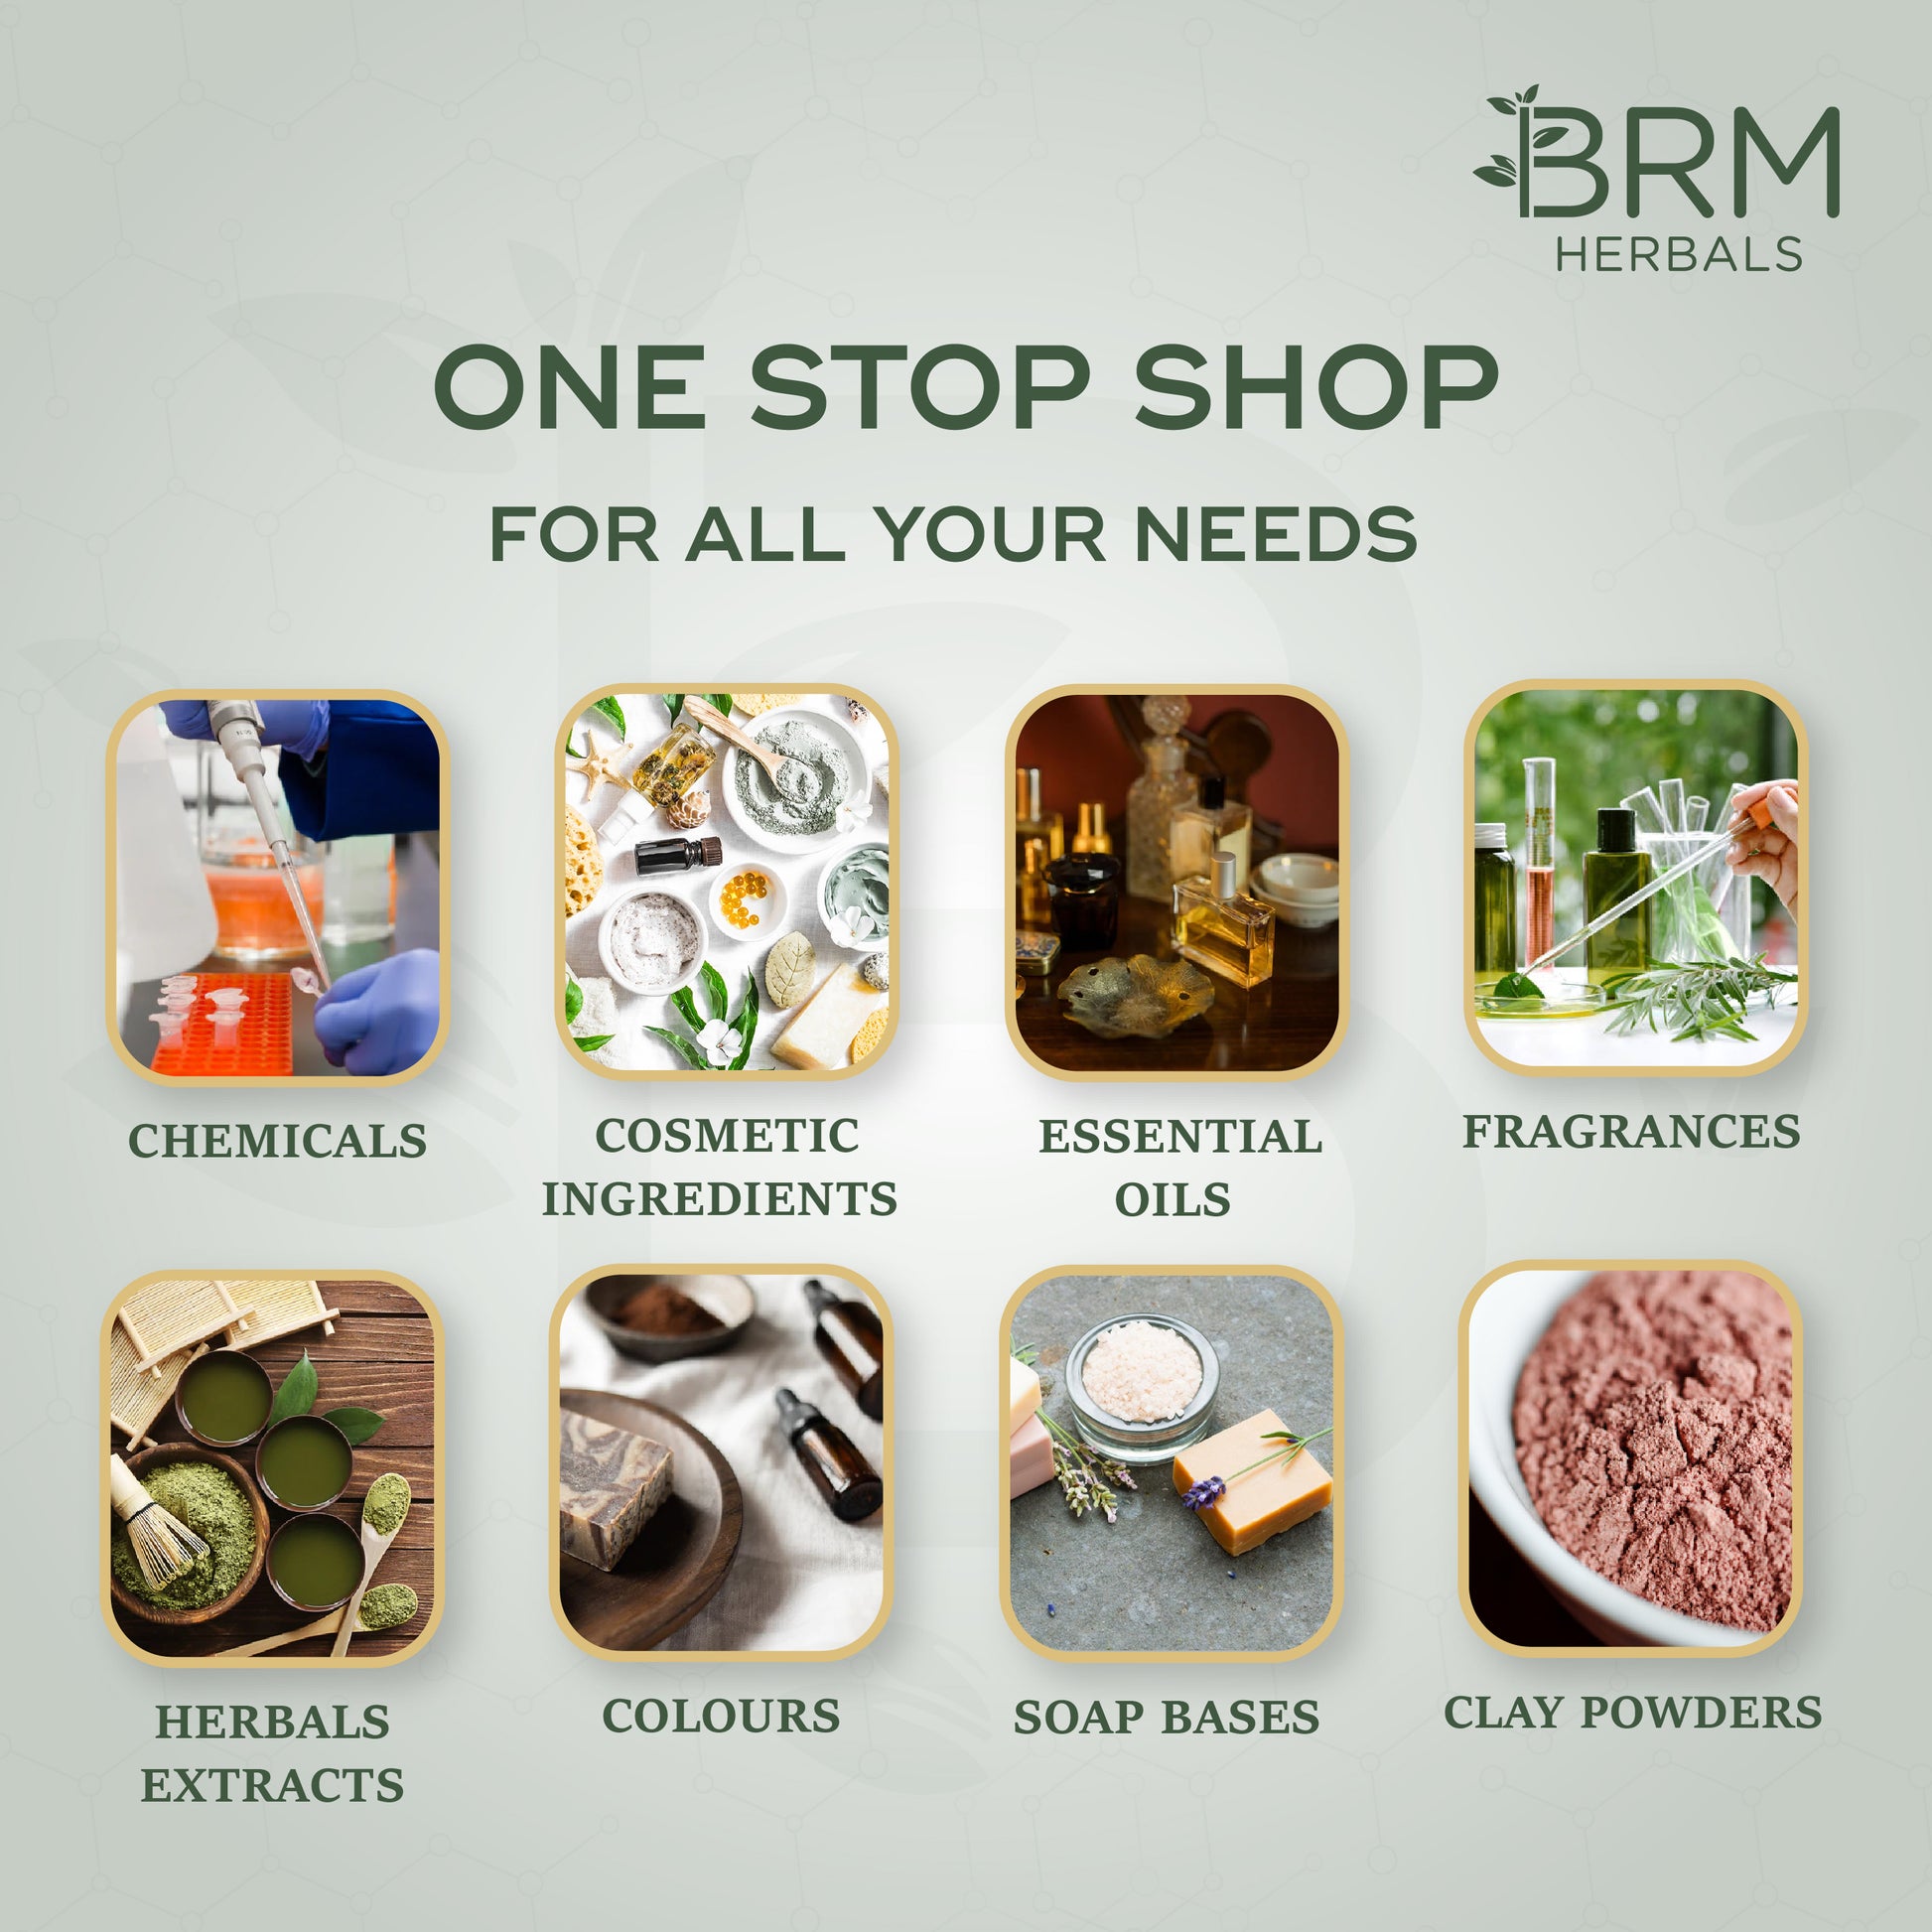 brm one stop banner with chemicals, cosmetic ingredients, essential oils, fragrances, herbals extracts, colours, soap bases, clay powders